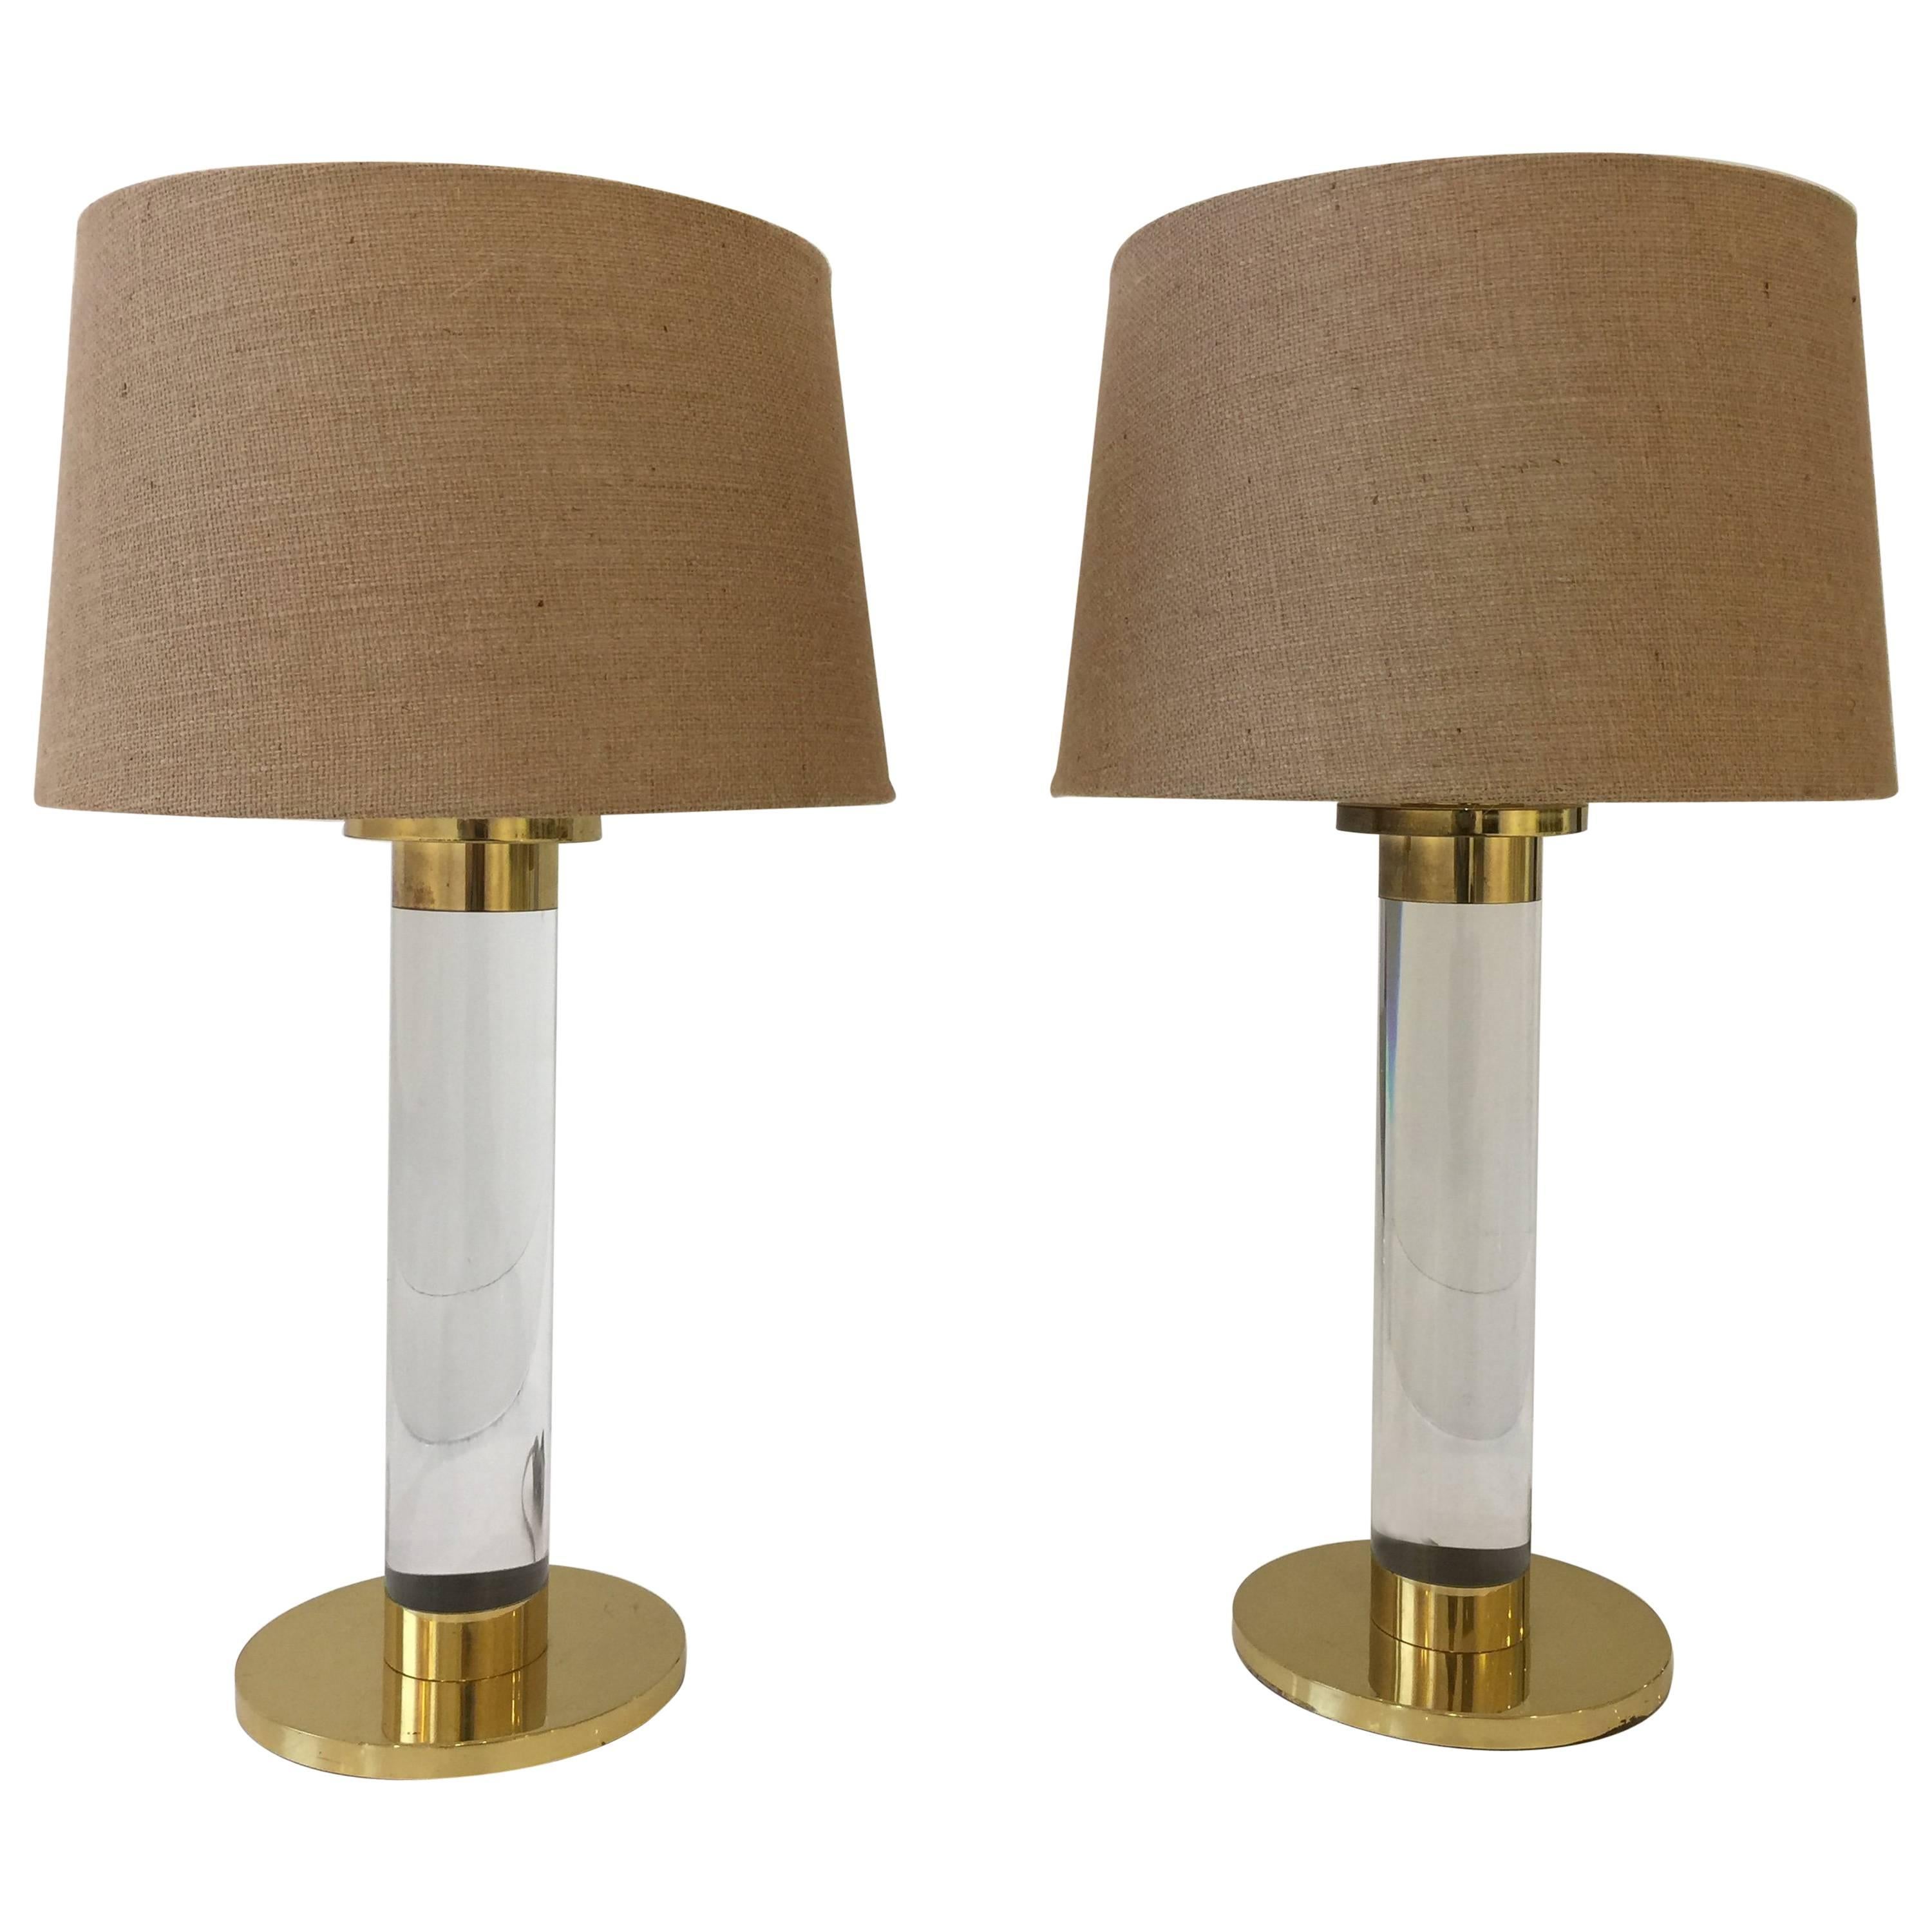 Pair of Lucite and Brass Cylindrical Table Lamps